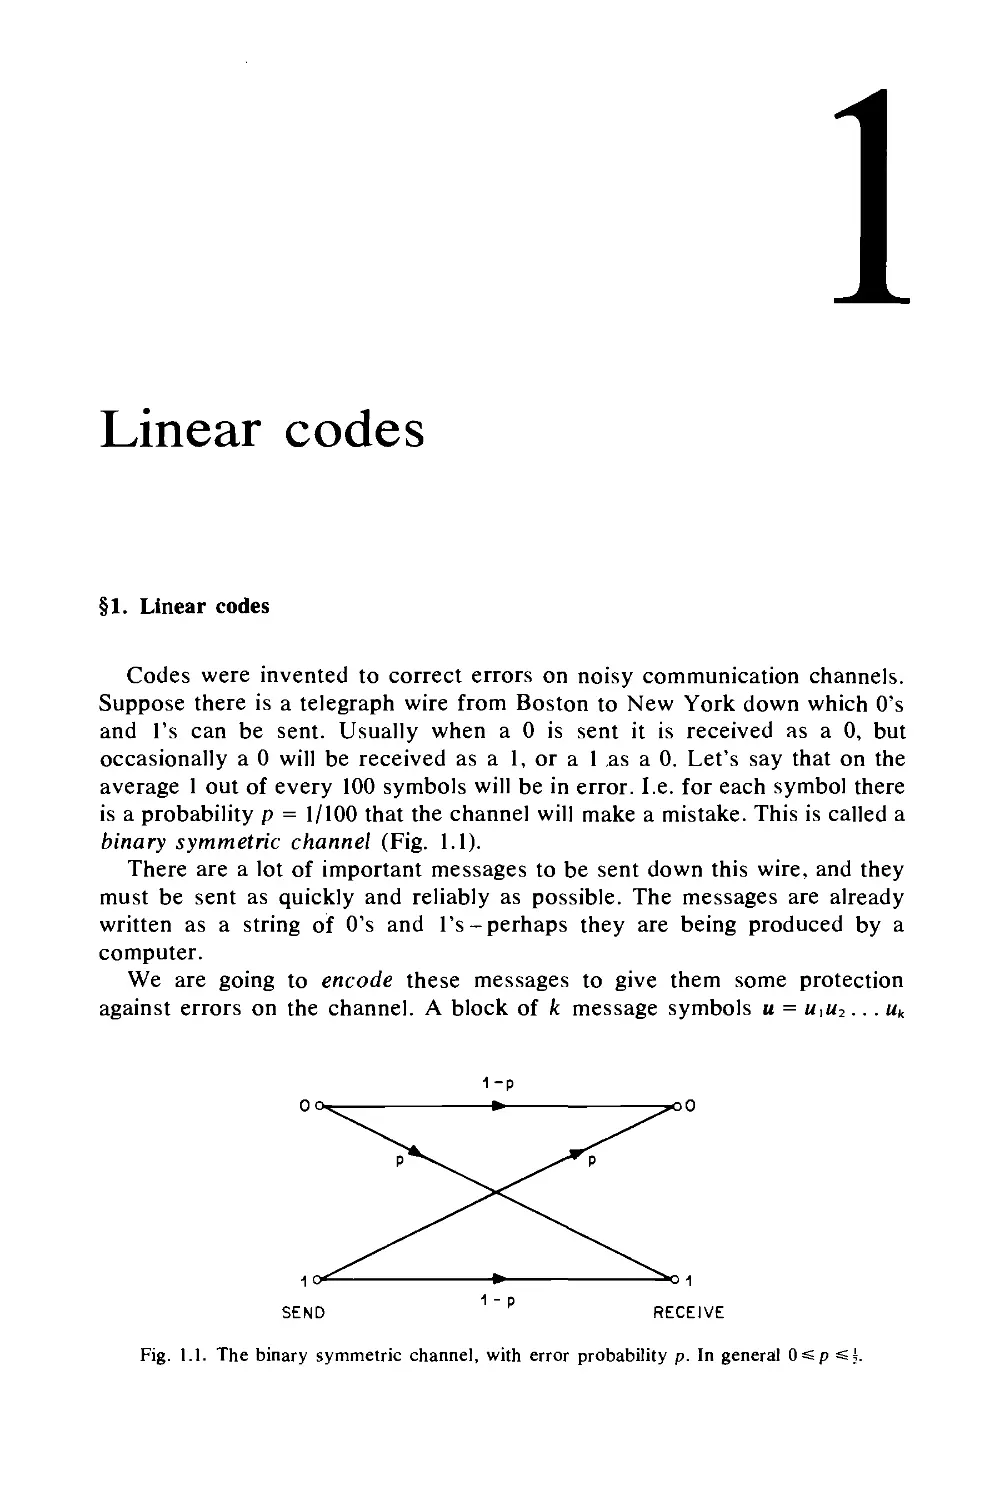 1. Linear codes